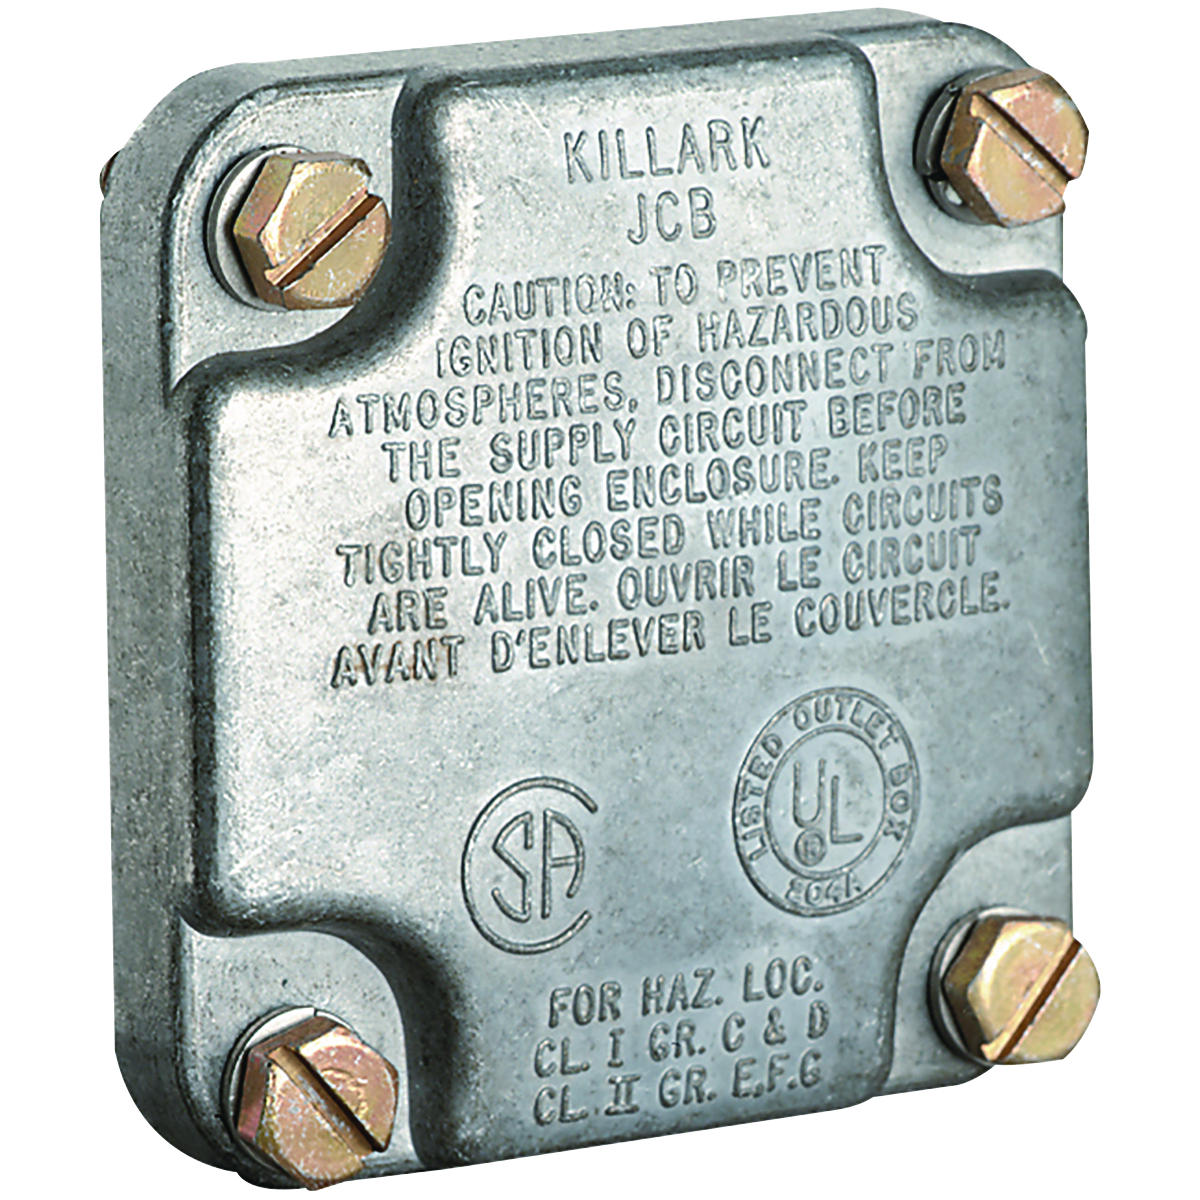 JL/JAL SERIES FITTINGS - OUTLET BODIES - REPLACEMENT BLANK COVER - DEPTH5/8 IN - VOLUME 1.0 CU IN